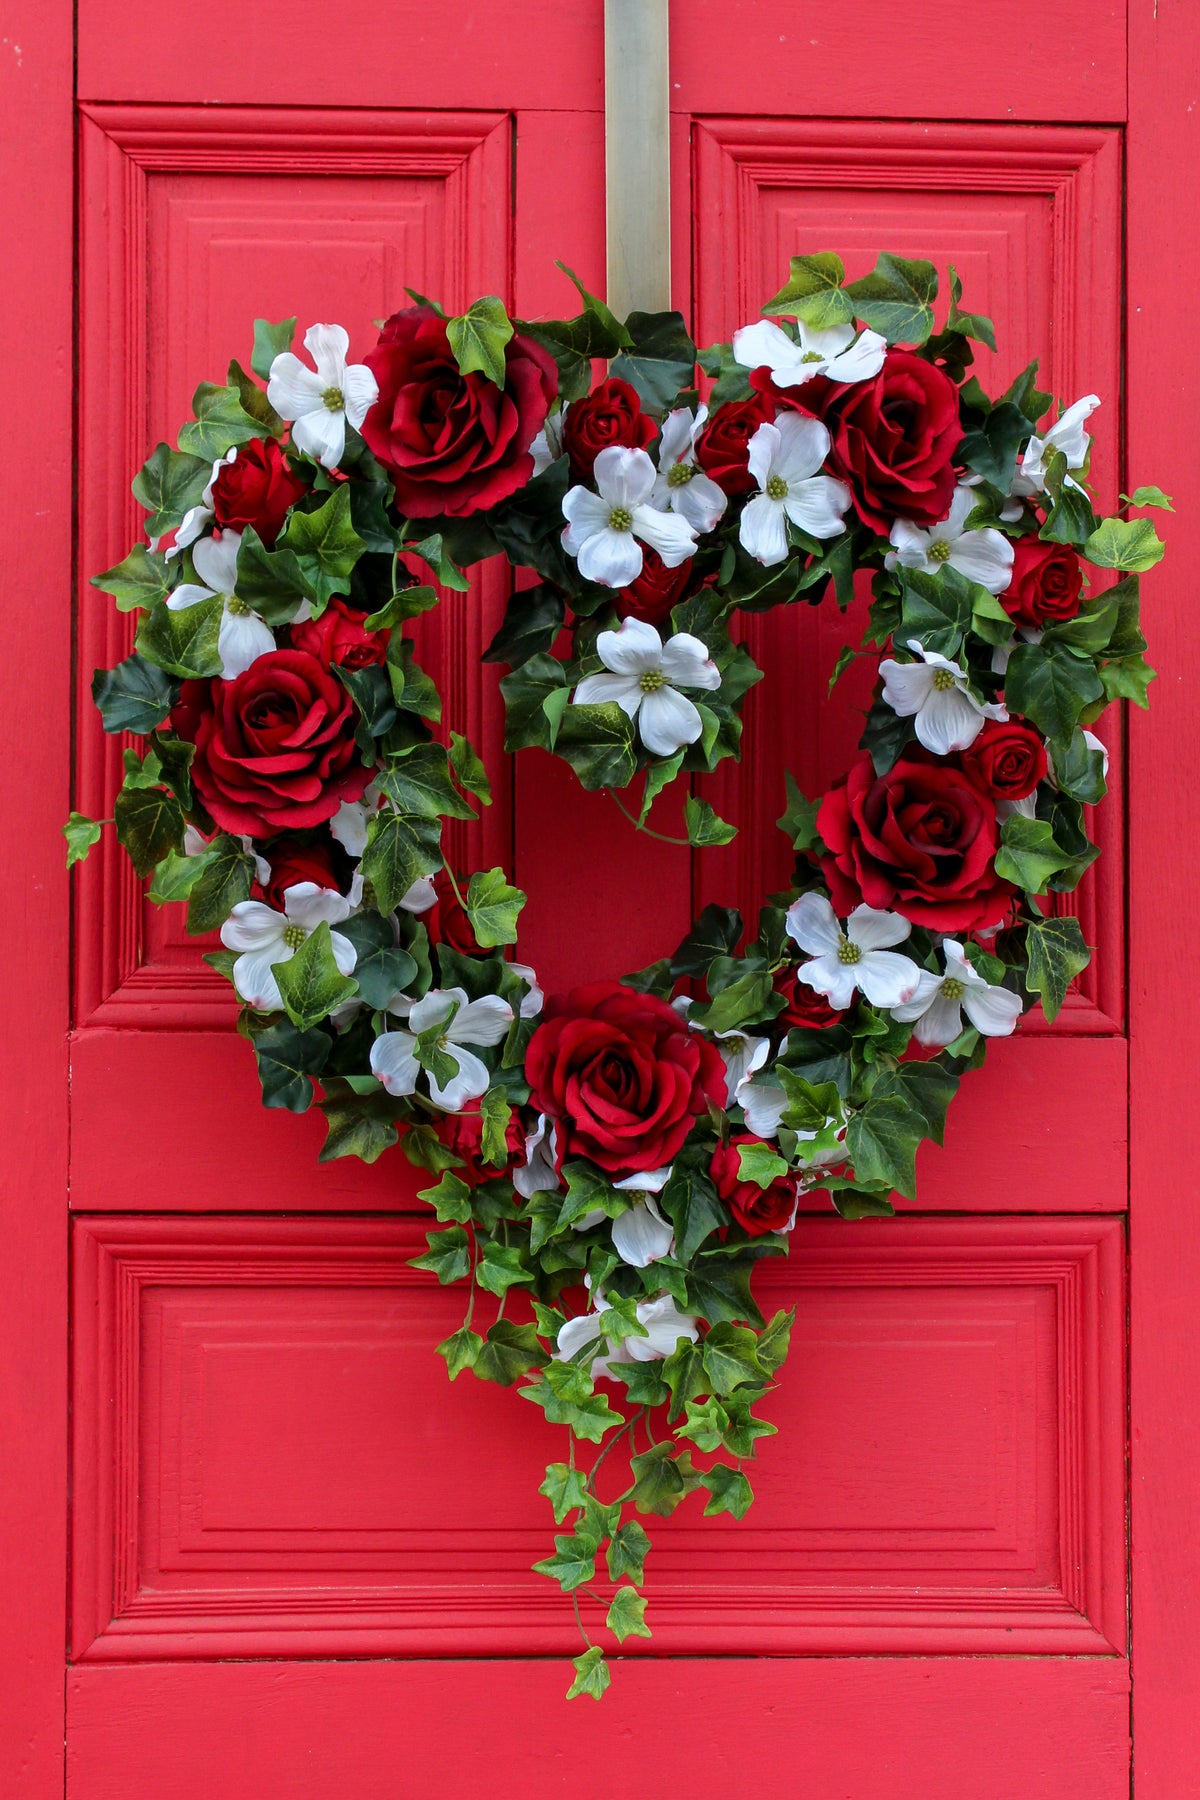 Red Rose, White Dogwood & Ivy Valentine's Heart Wreath – Darby